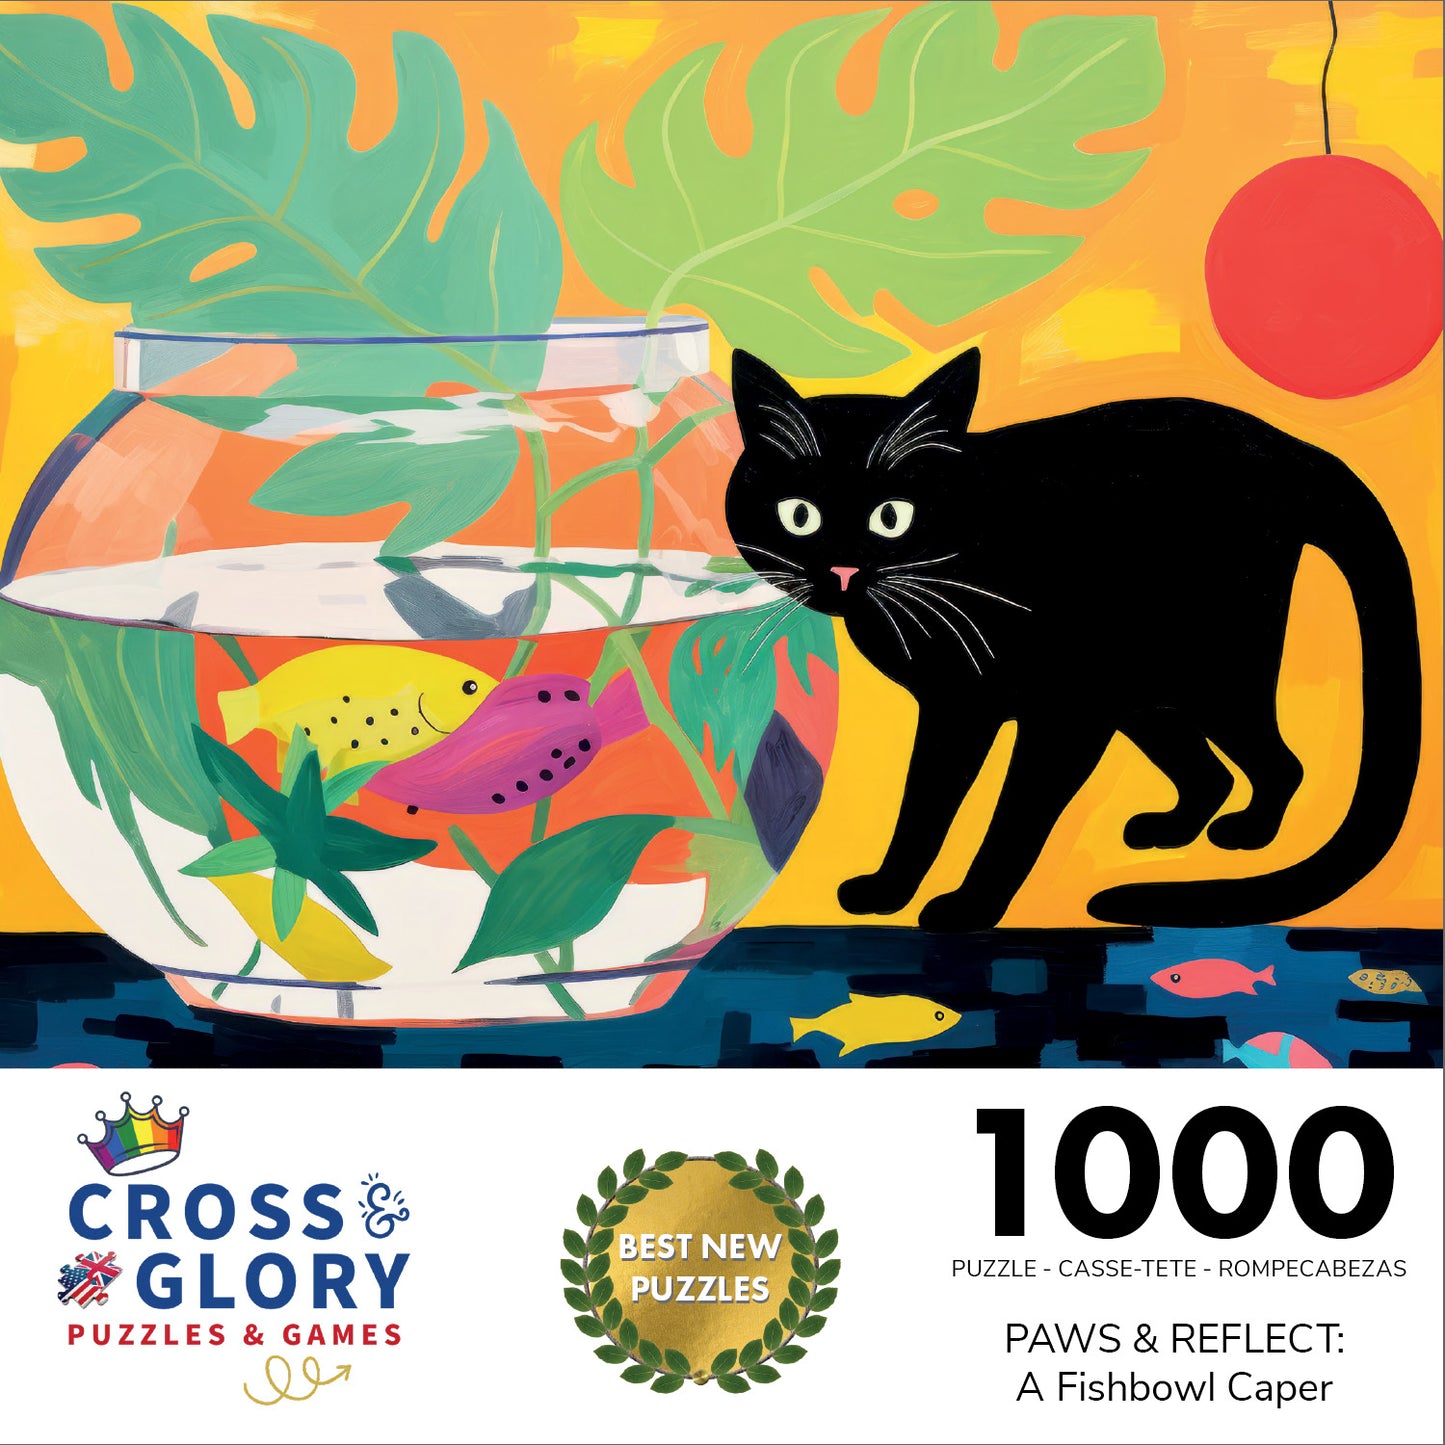 Paws & Reflect: A Fishbowl Caper - 1000 Piece Jigsaw Puzzle